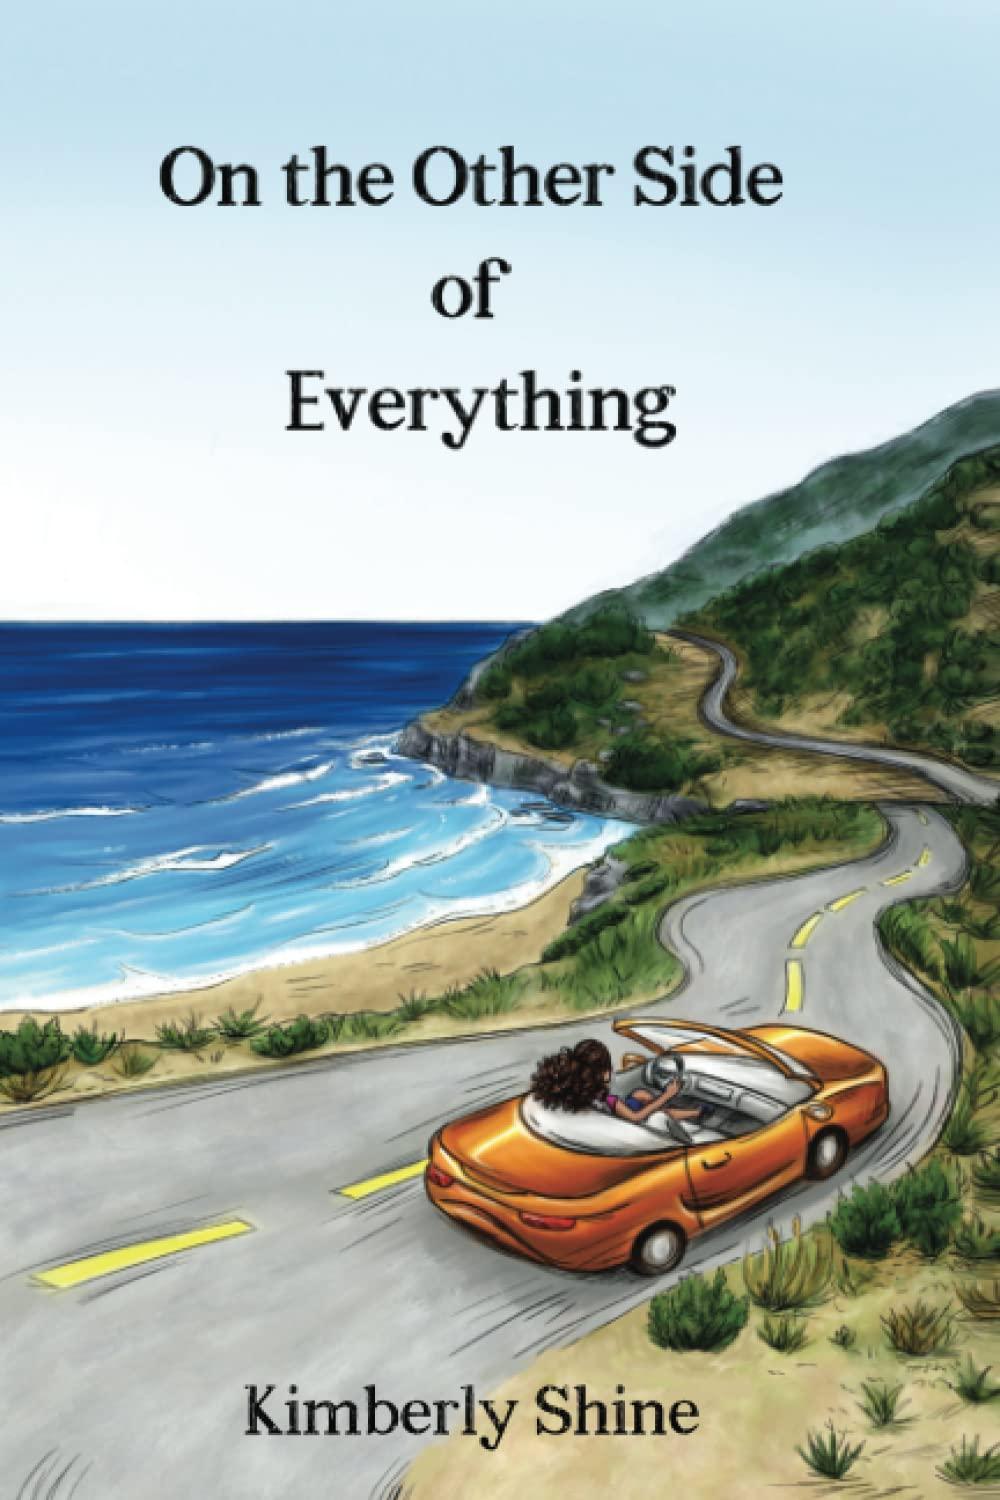 Milwaukee TV Reporter Self-Publishes First Book “On the Other Side of Everything”